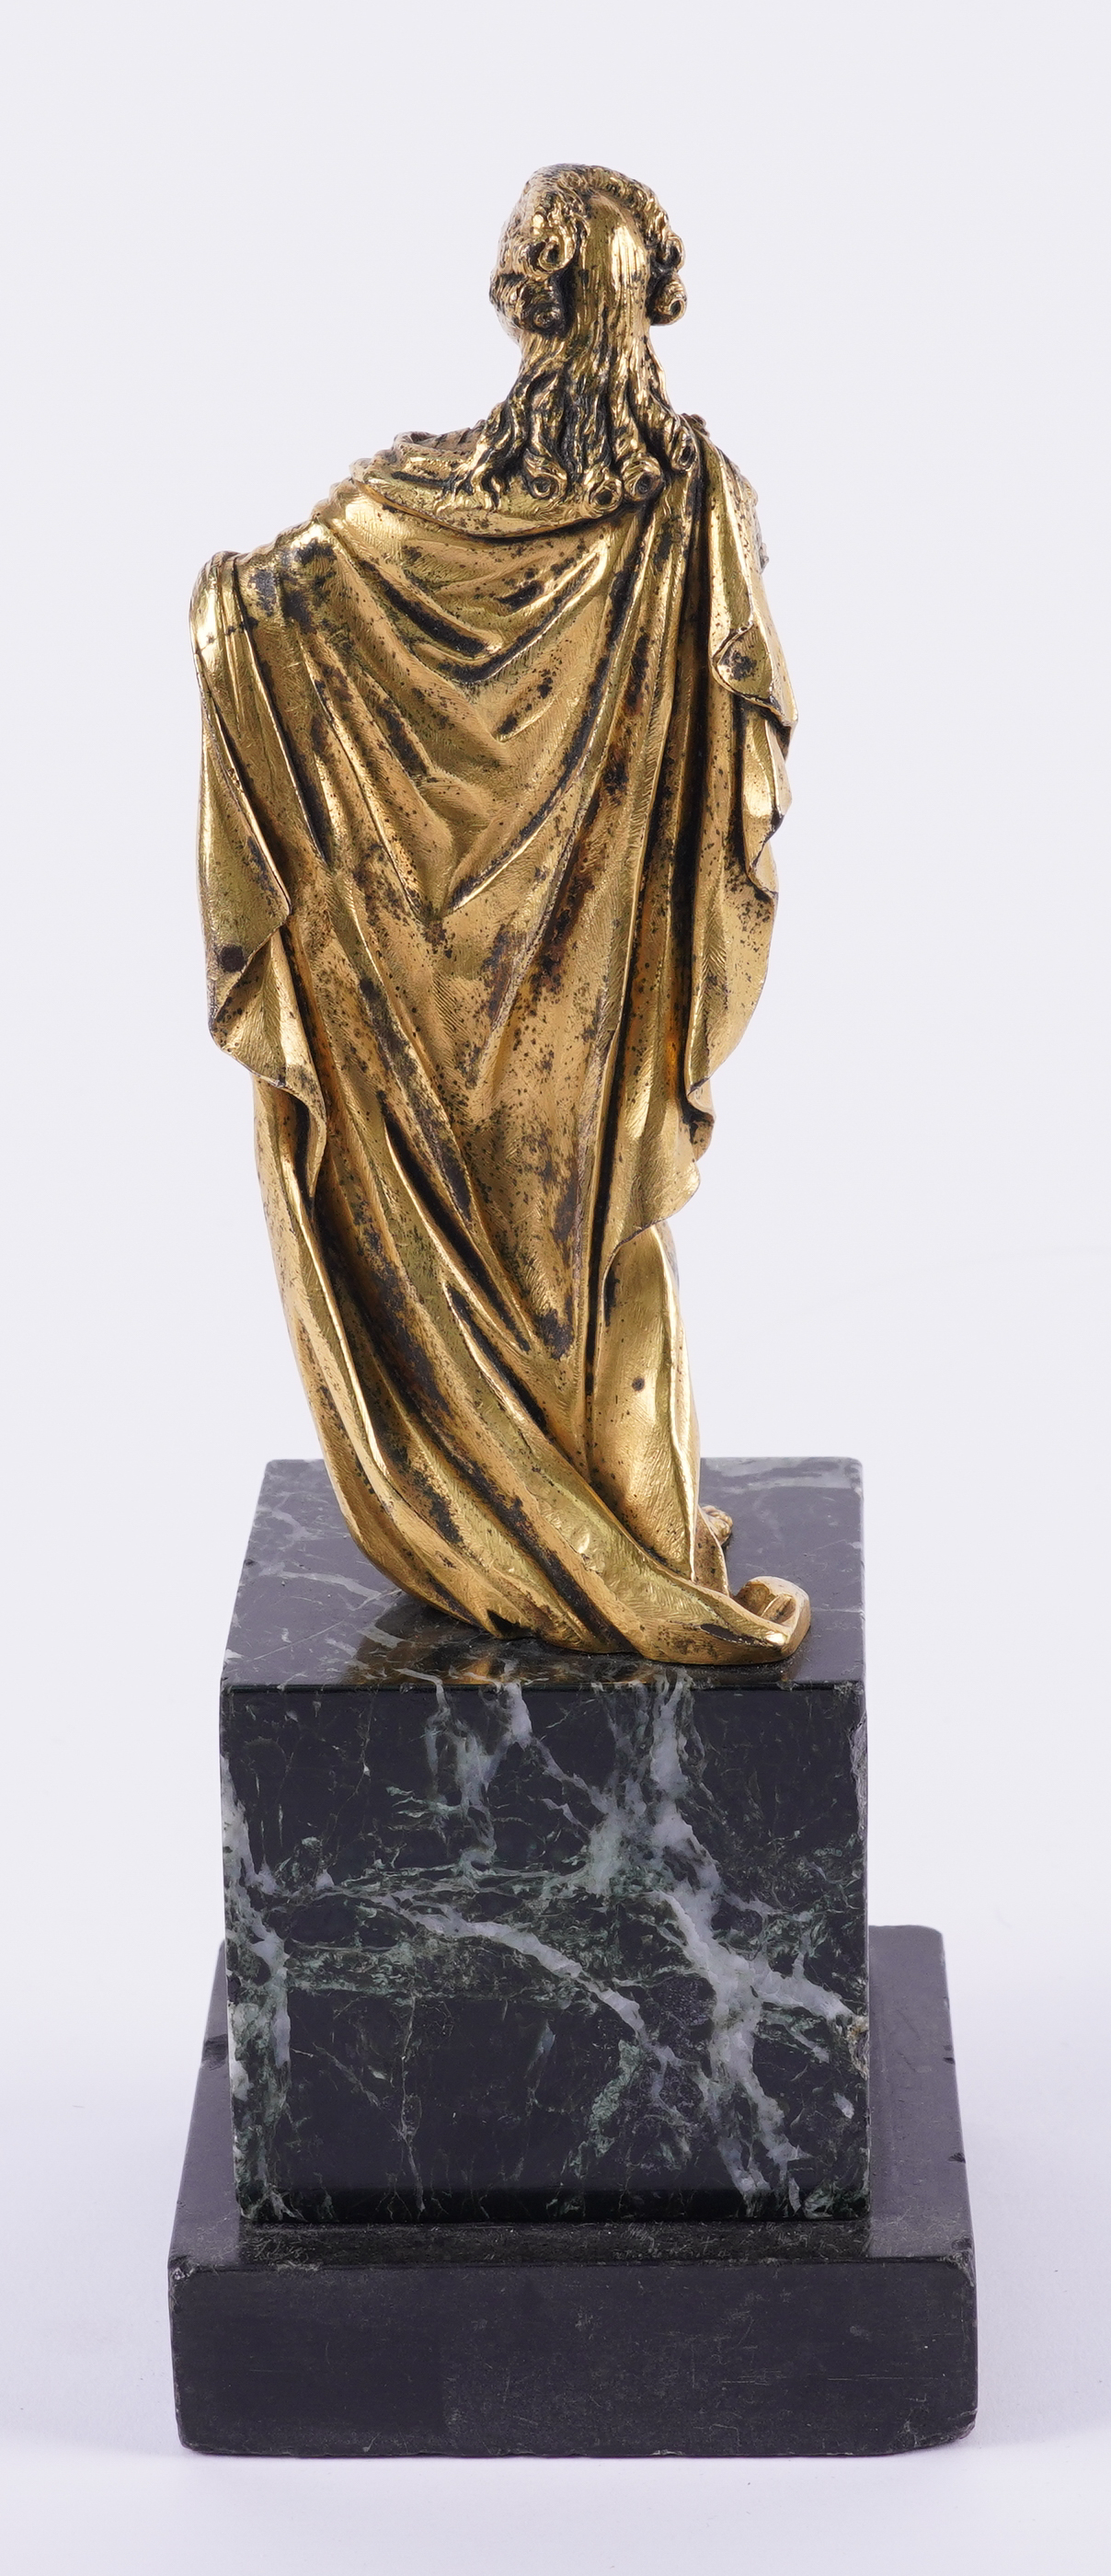 A GILT-BRONZE FIGURE OF A MONARCH MODELLED AS A ROMAN EMPEROR MOUNTED ON A VERDI GRIS MARBLE... - Image 3 of 4